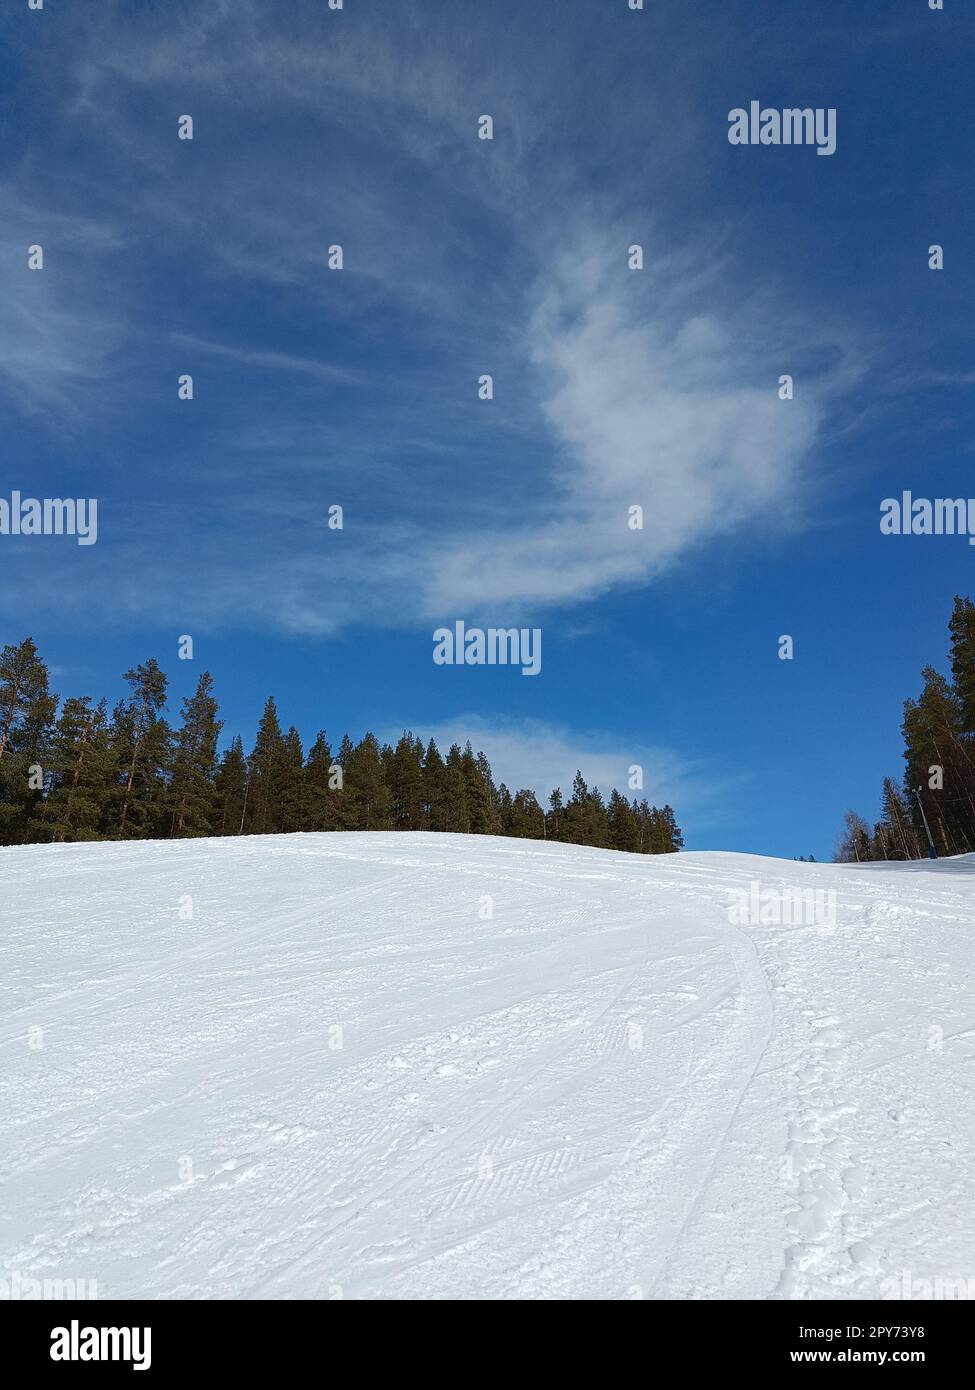 A day in the ski slope during the winter. Small resort called Kabdalis. Swedish downhill skiing. Stock Photo